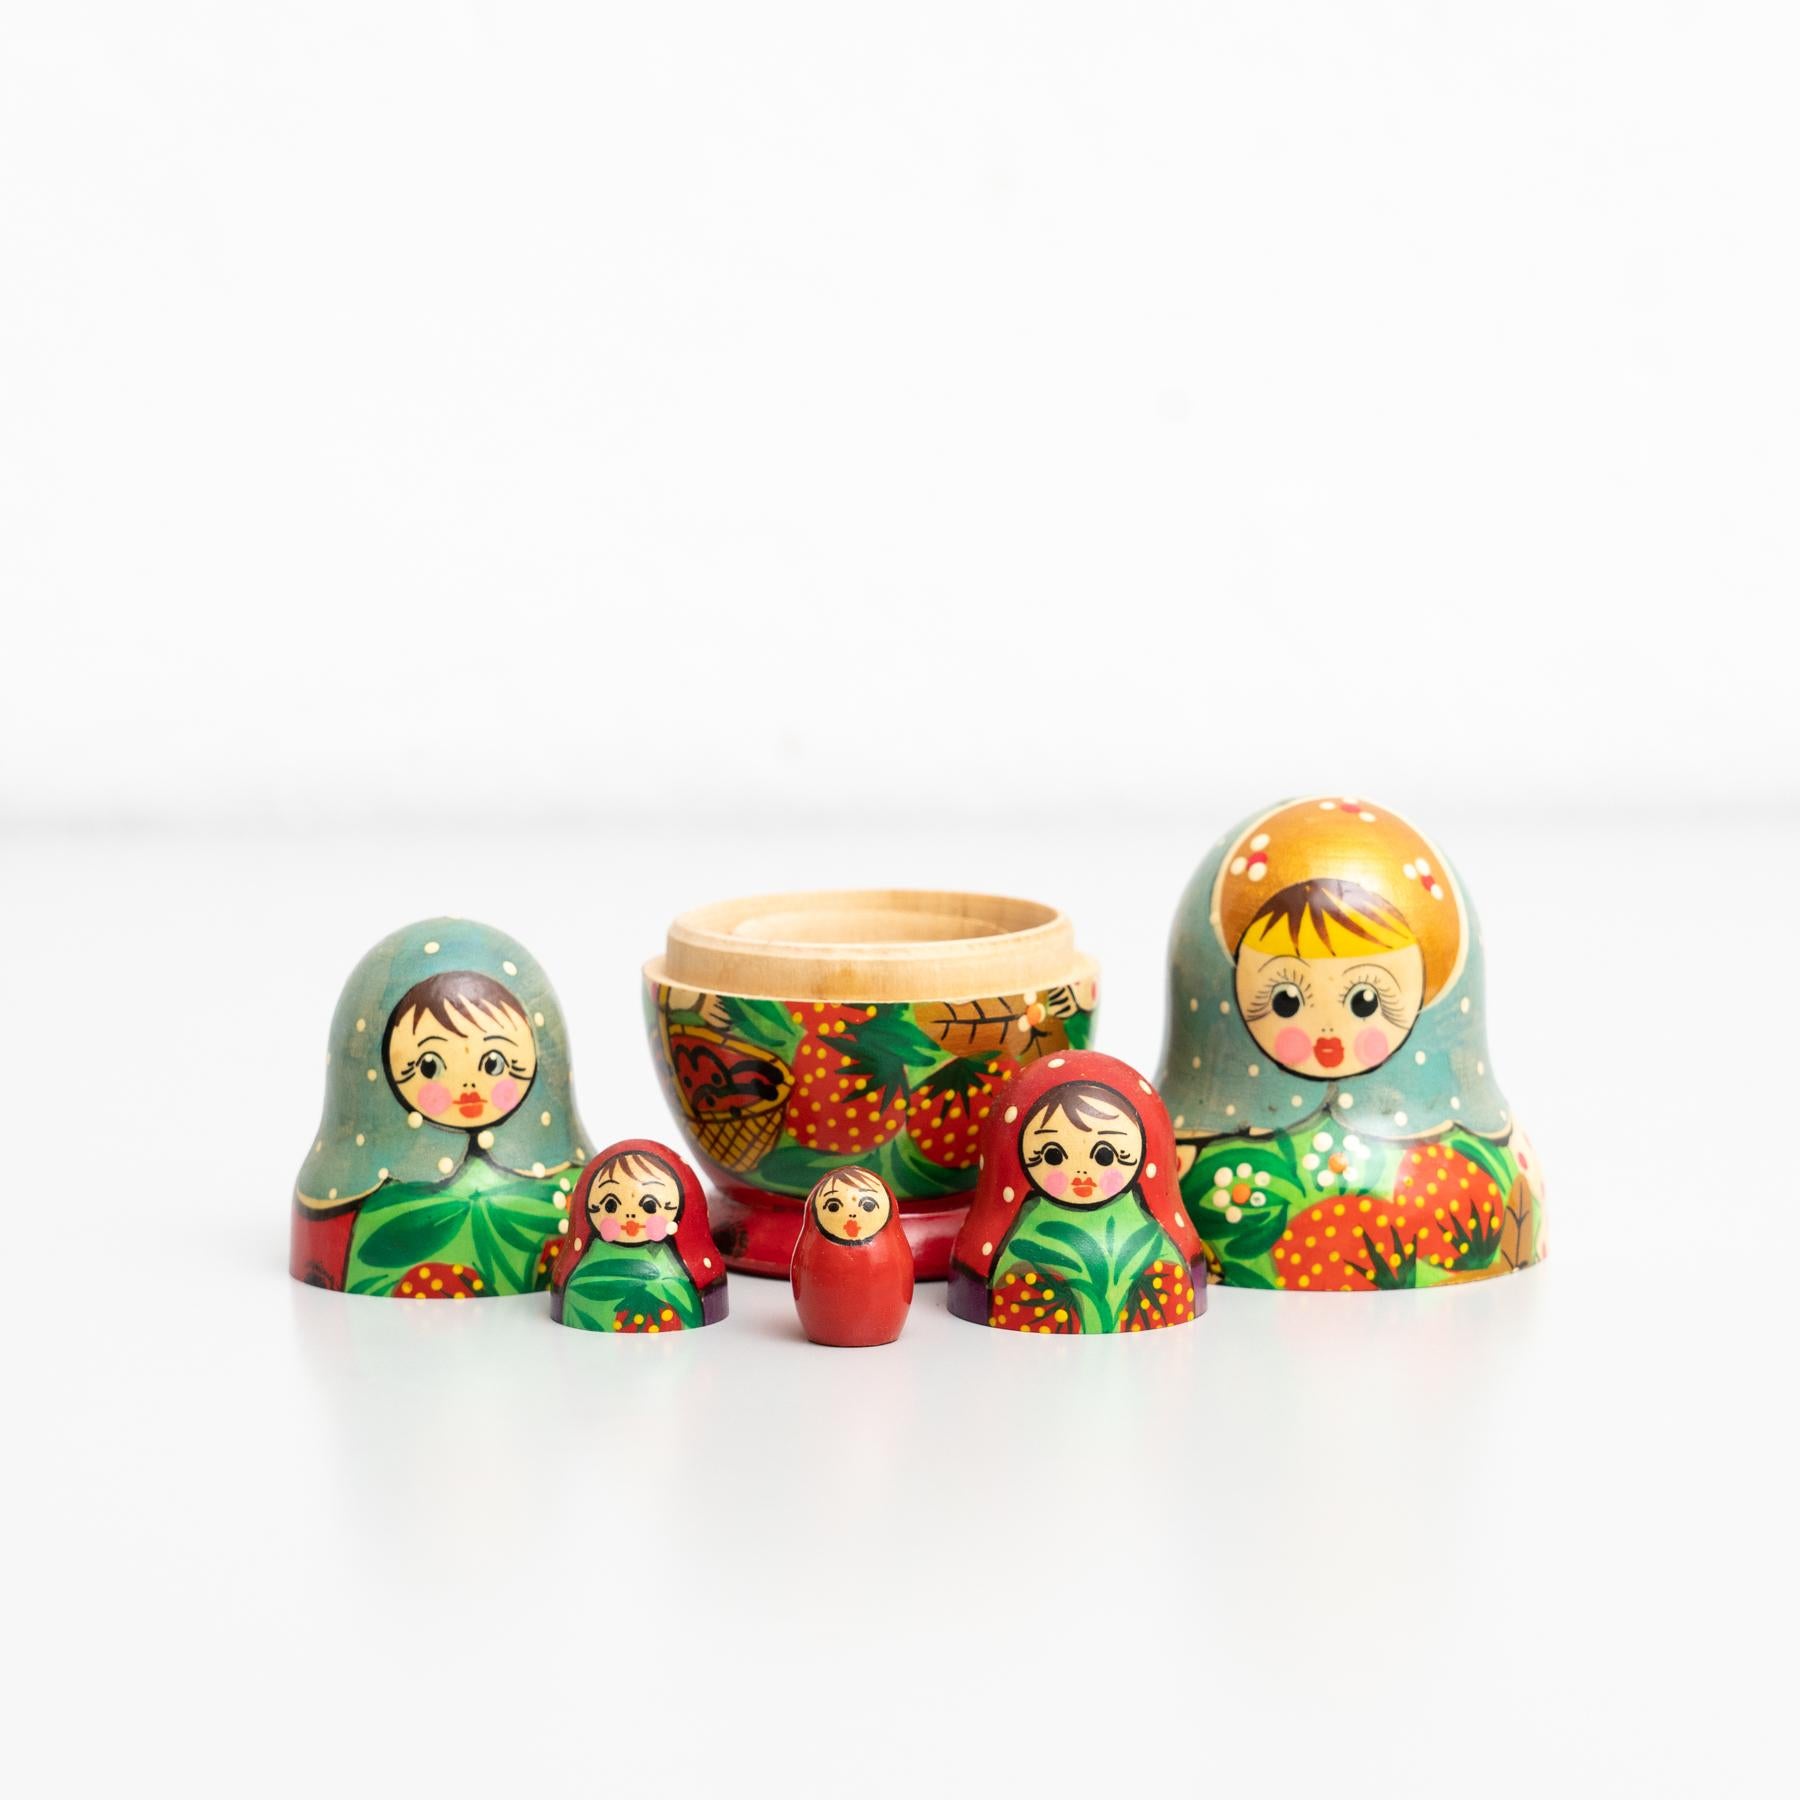 Antique Traditional Hand-Painted Wooden Russian Doll, circa 1960 For Sale 8